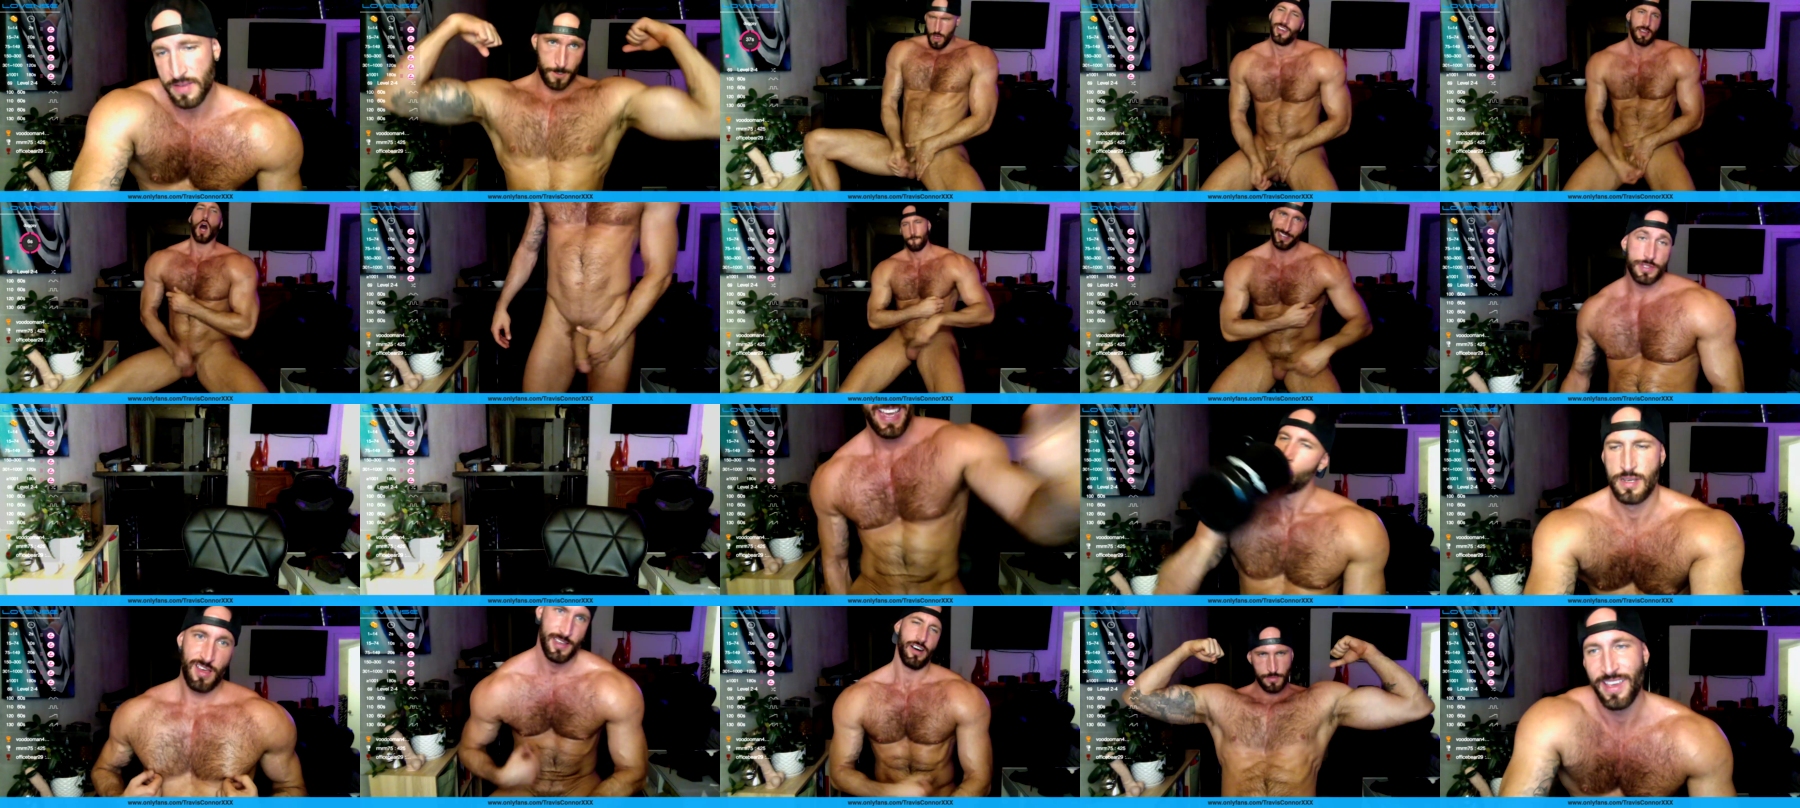 Travisconnor86  02-11-2021 Male Topless